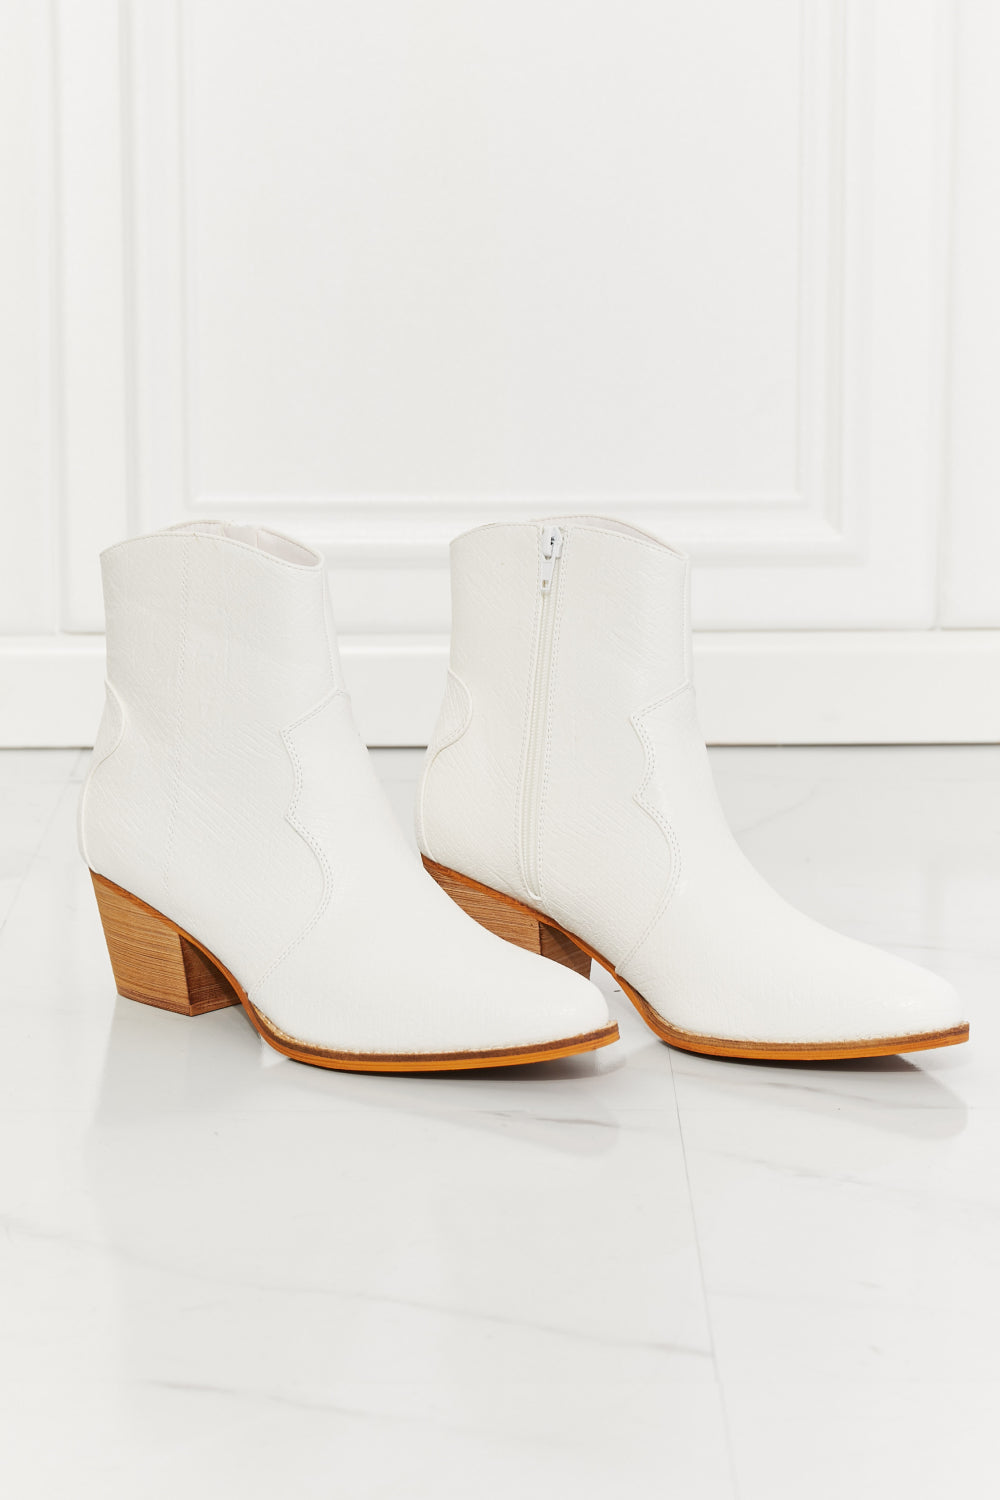 Watertower Town Vegan Leather Western Ankle Boots in White - Copper + Rose